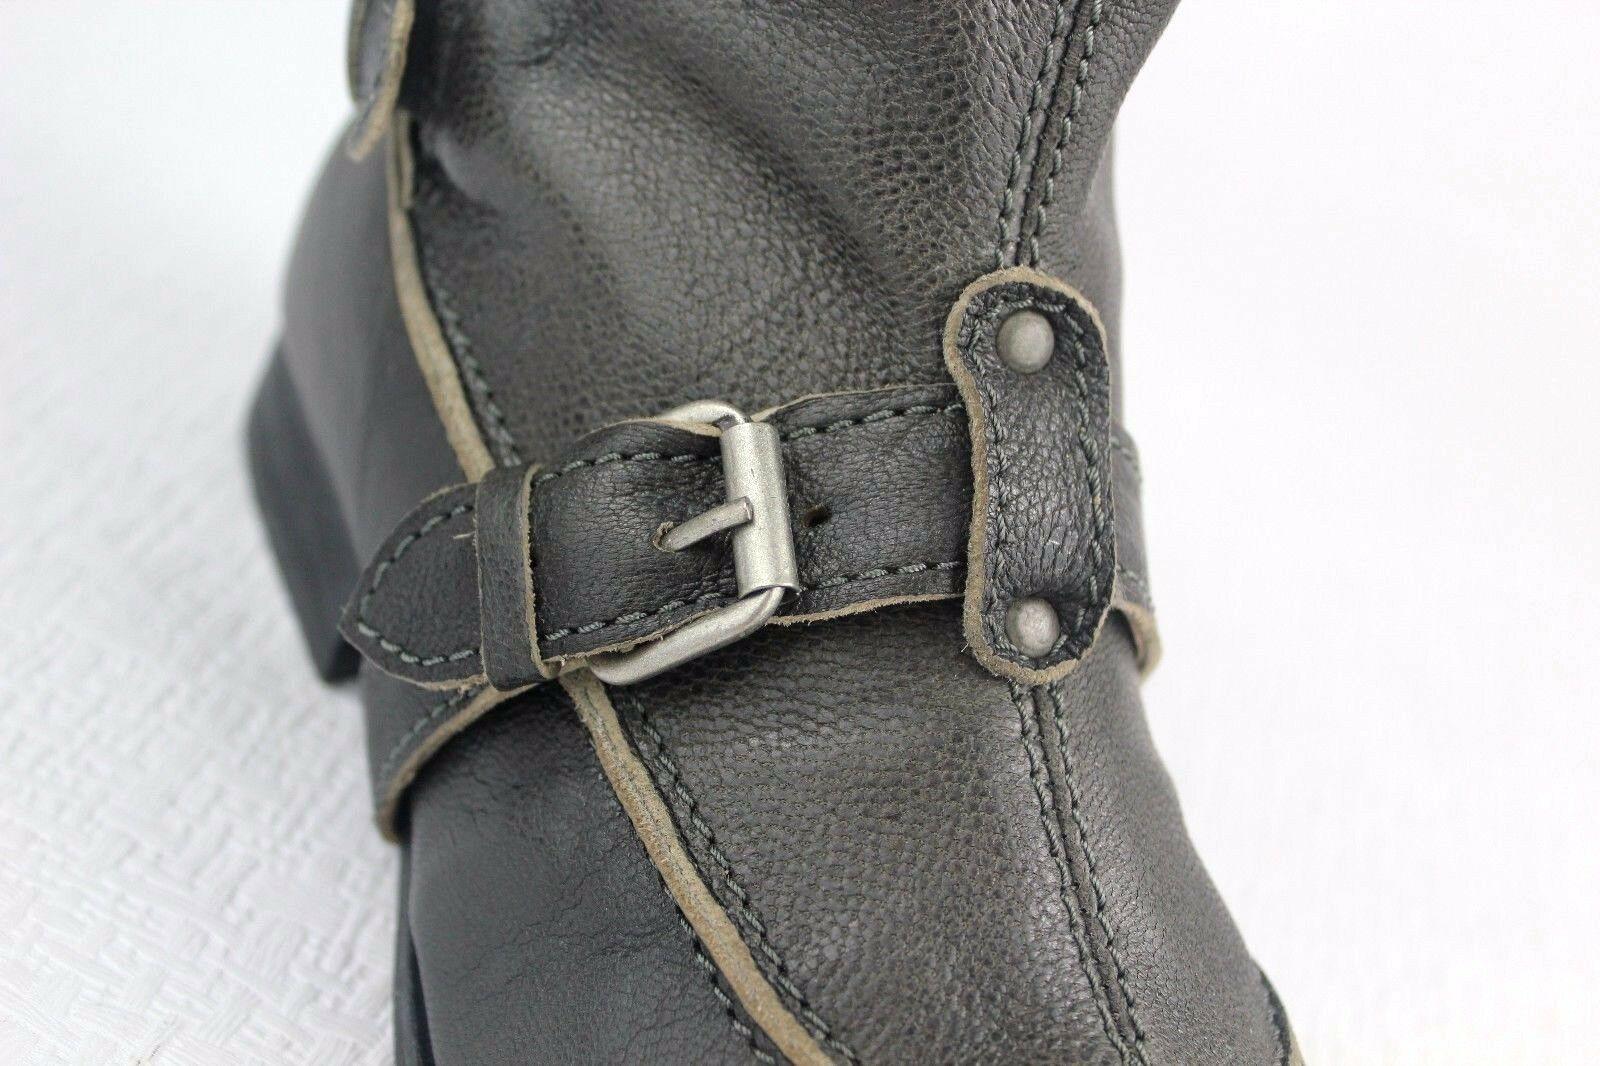 J. Litvack Grey Tall Leather Buckled Laced Riding Flat Moto Boots Size 38 - SVNYFancy